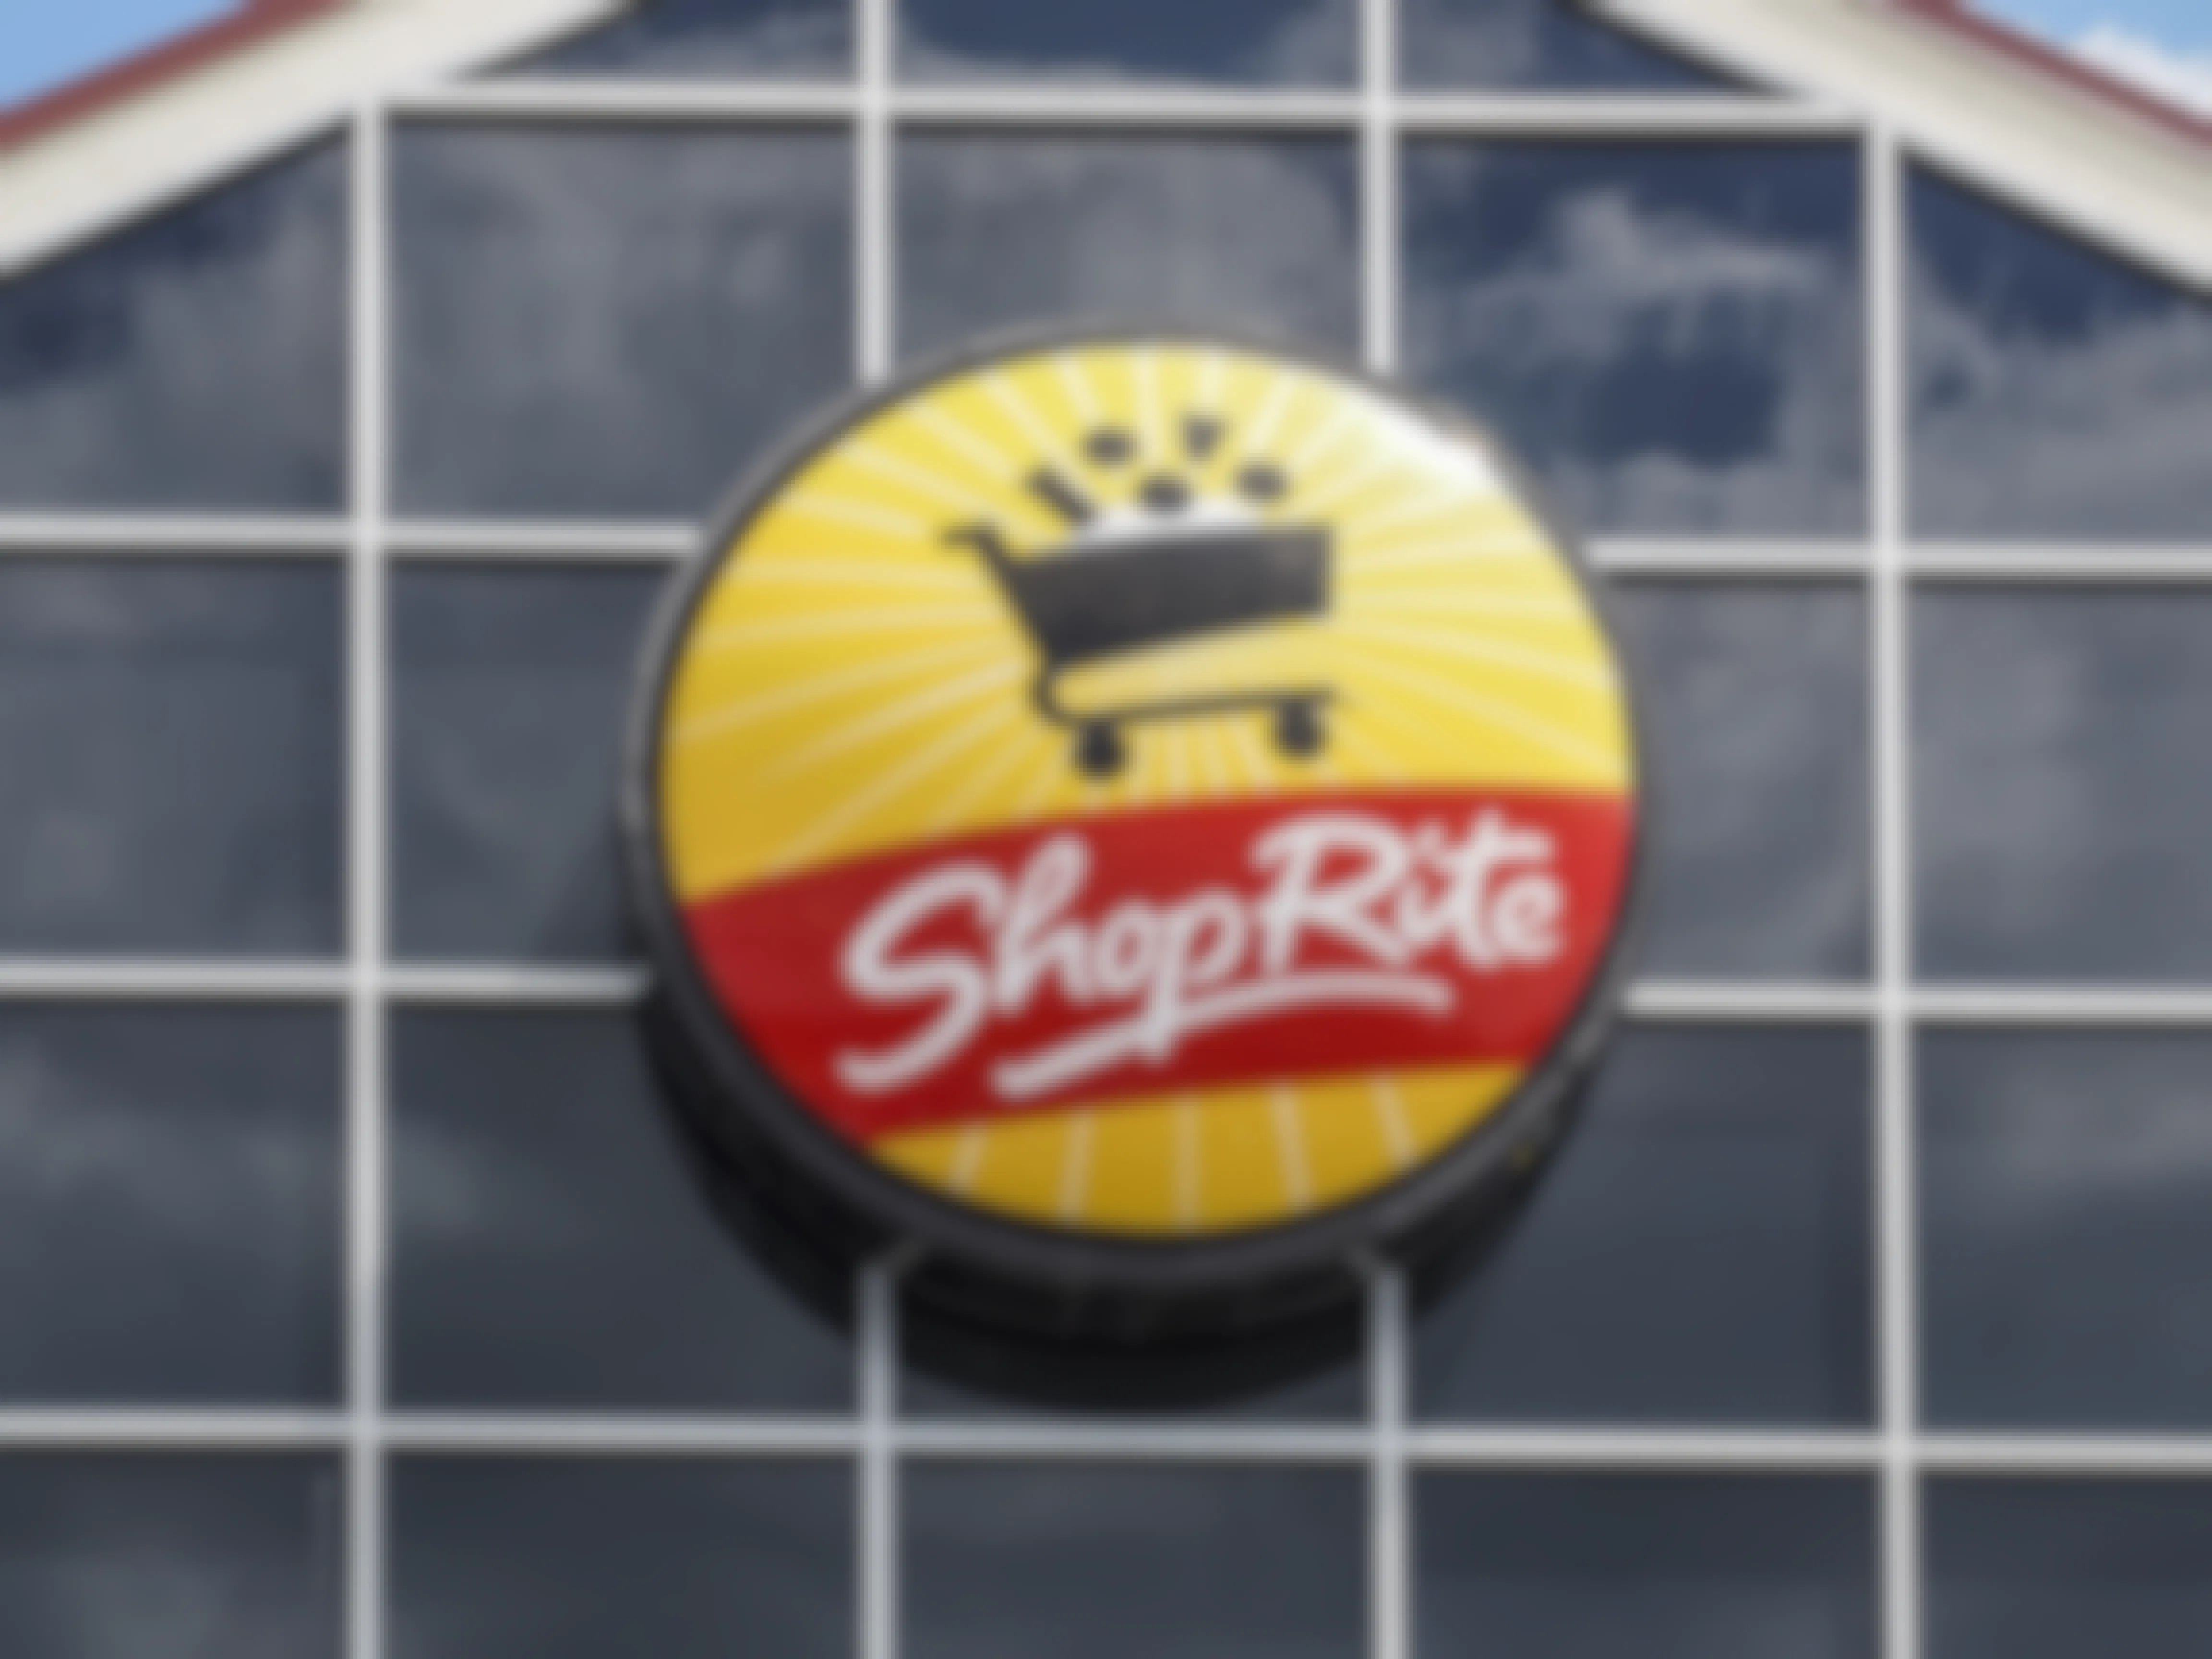 The ShopRite logo on a building